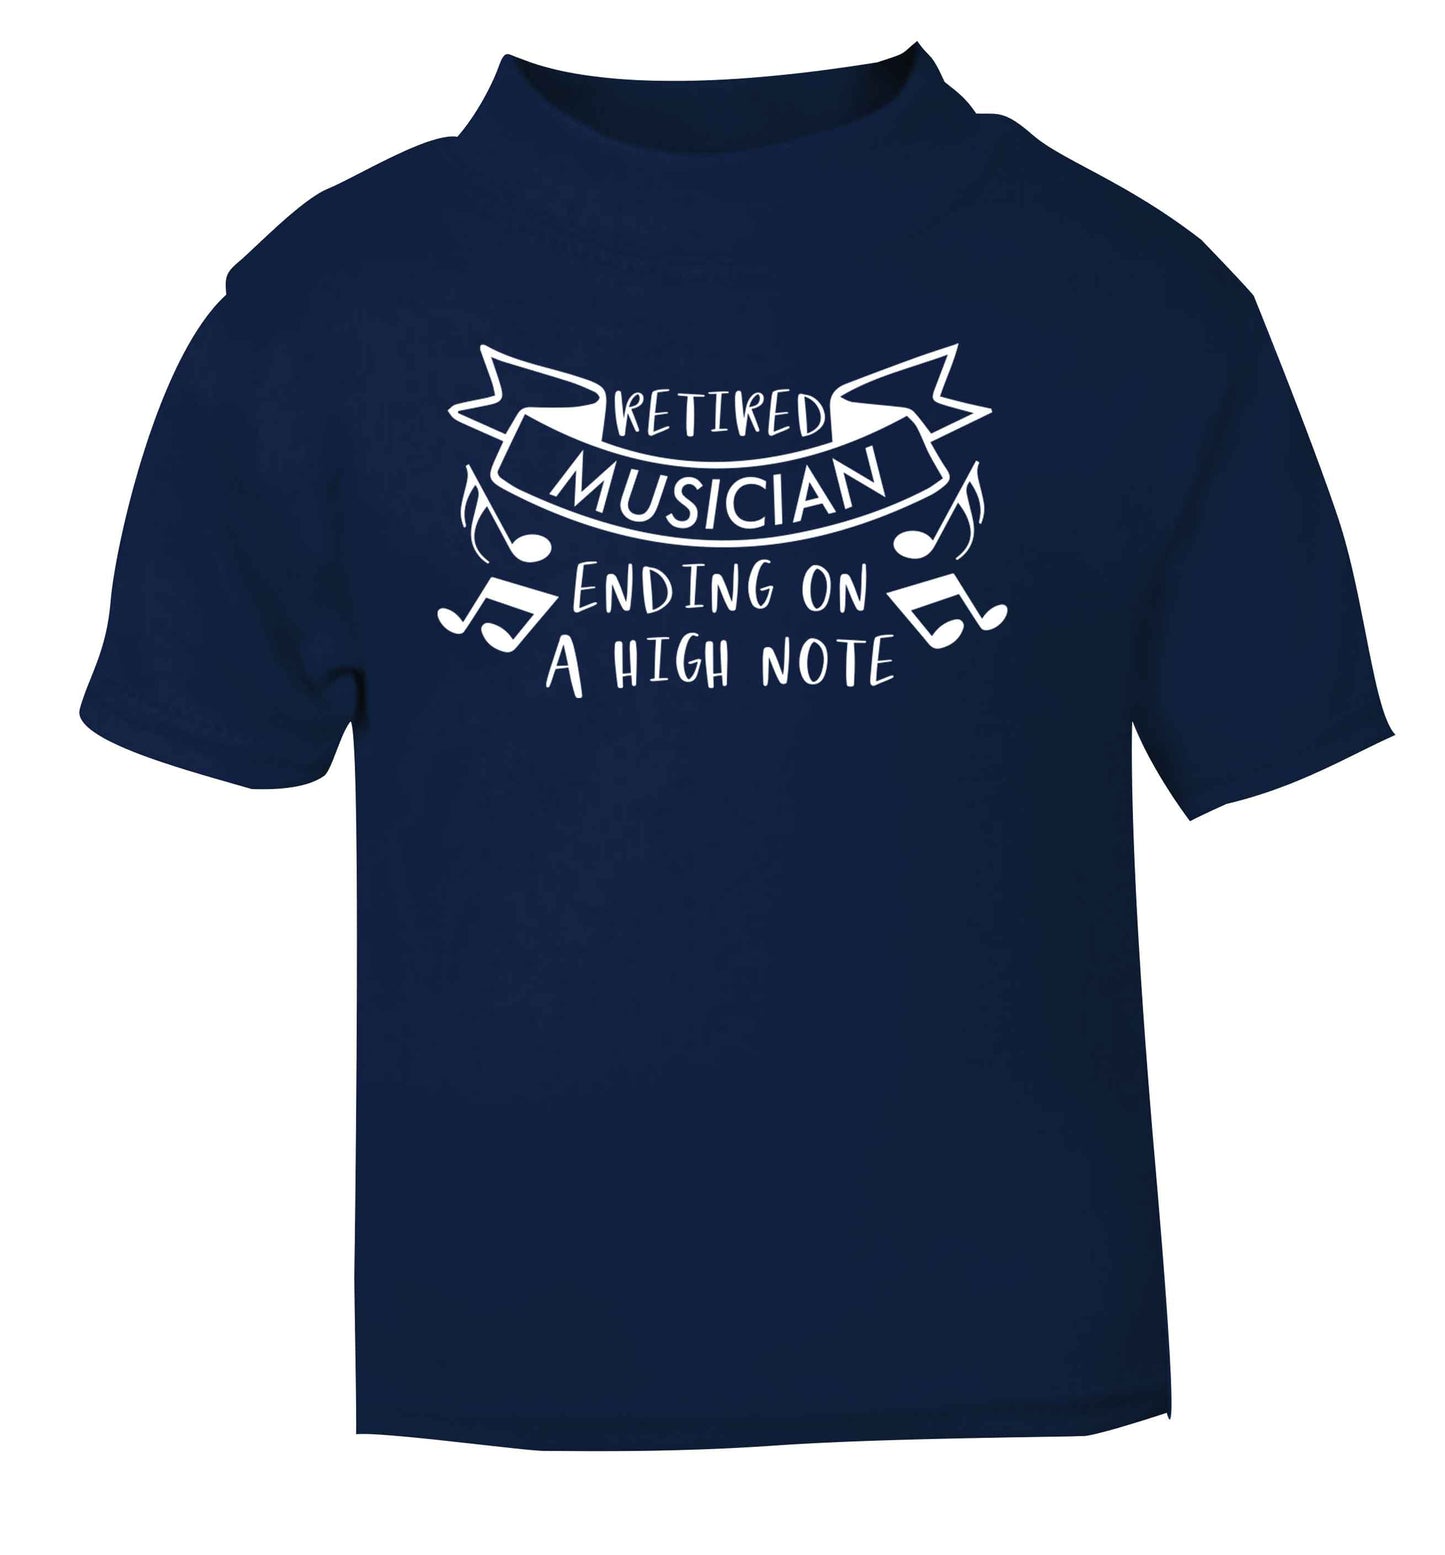 Retired musician ending on a high note navy Baby Toddler Tshirt 2 Years